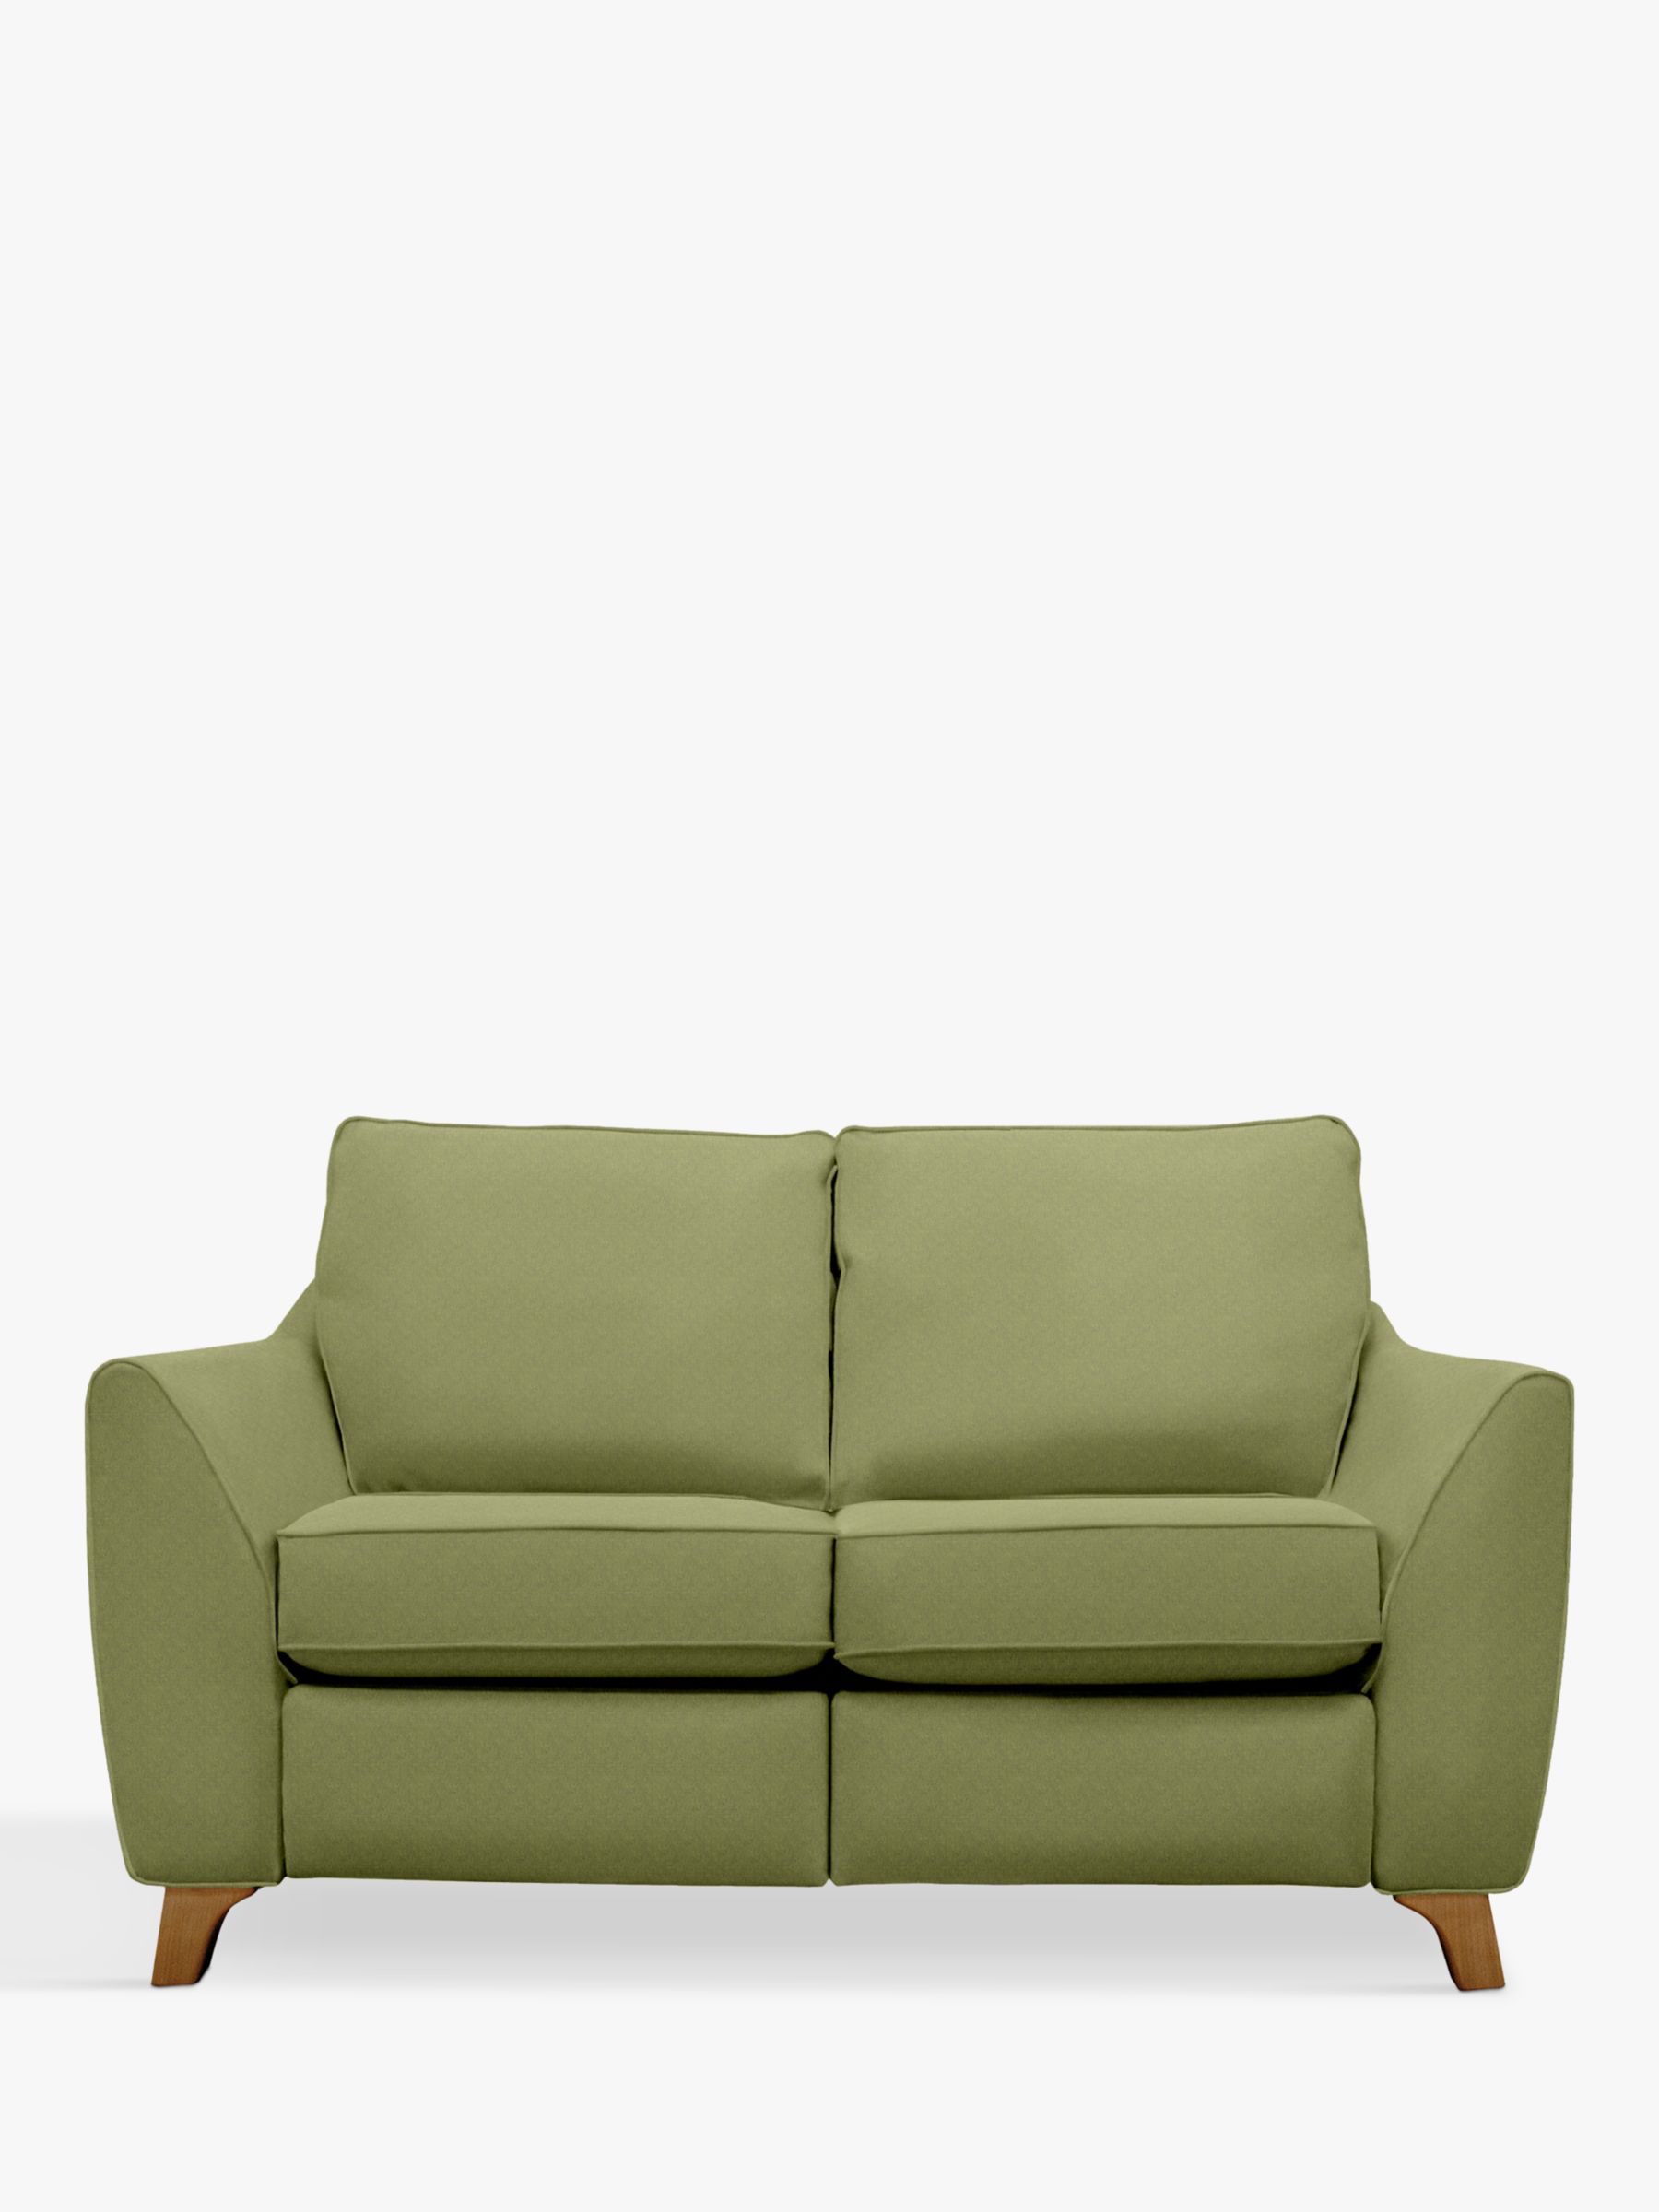 The Sixty Eight Range, G Plan Vintage The Sixty Eight Small 2 Seater Sofa, Marl Green